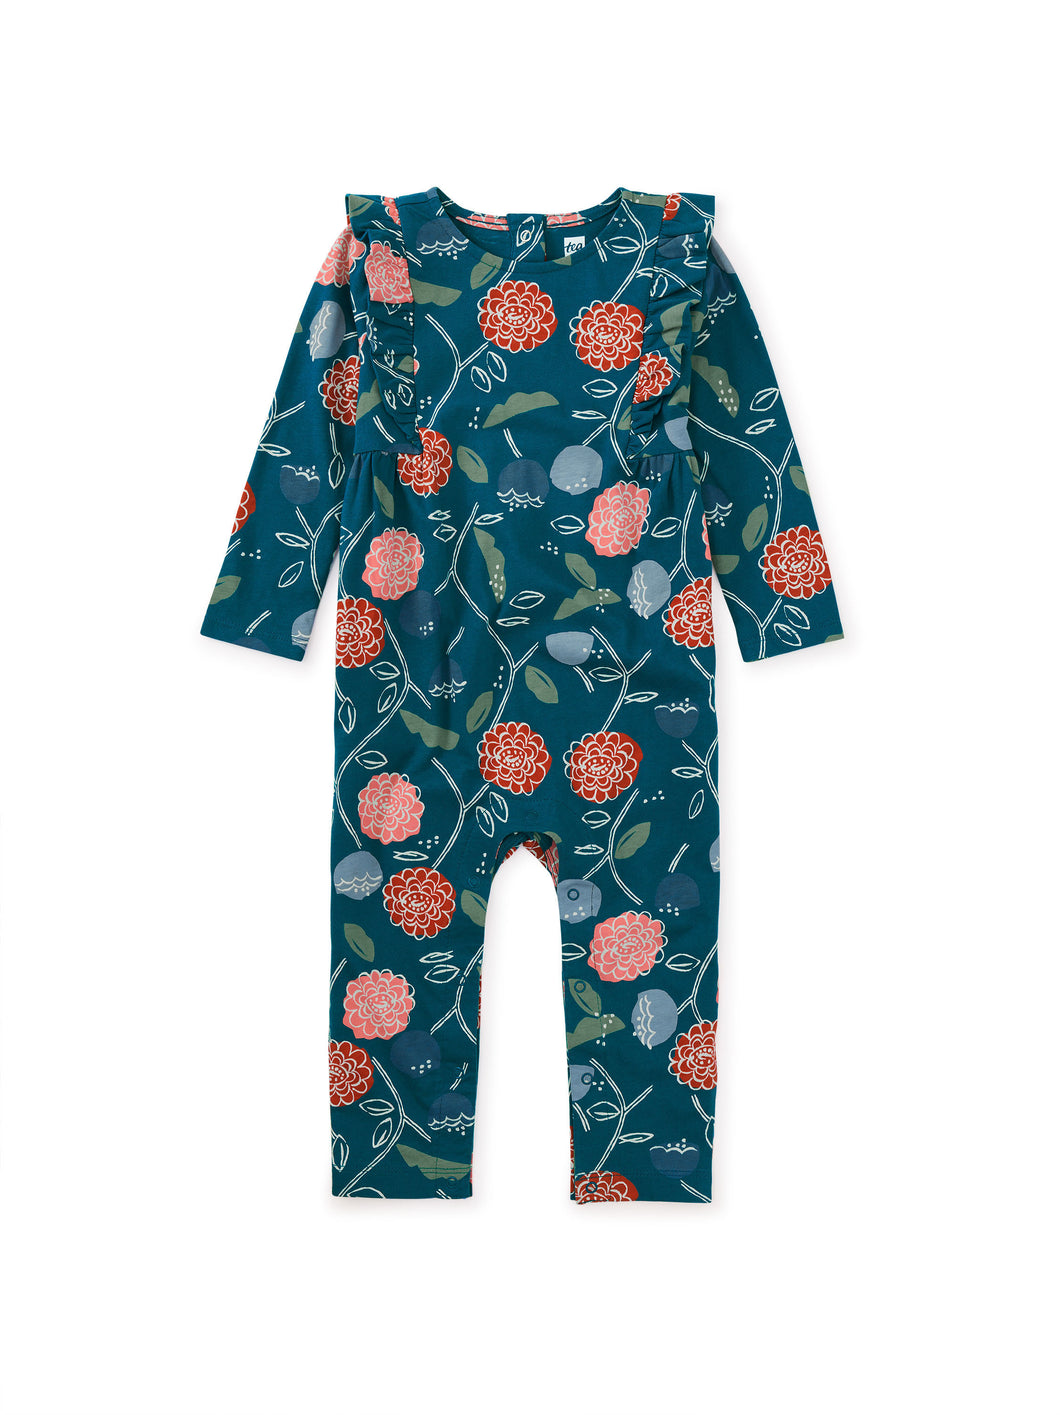 Tea Collection Ruffle Baby Romper - Folk Floral